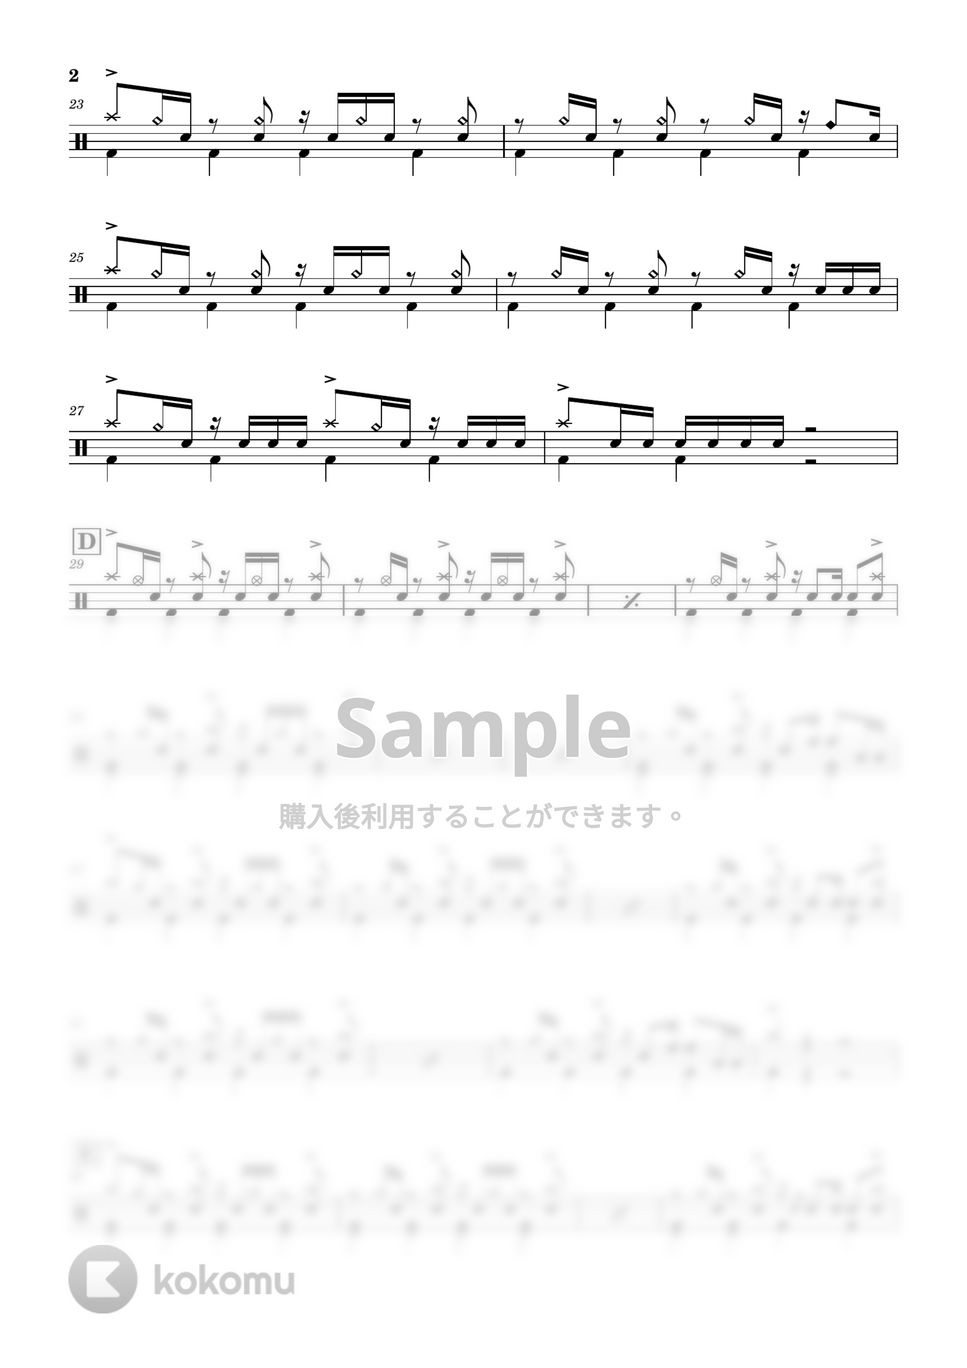 [Alexandros] - ワタリドリ by Cookie's Drum Score